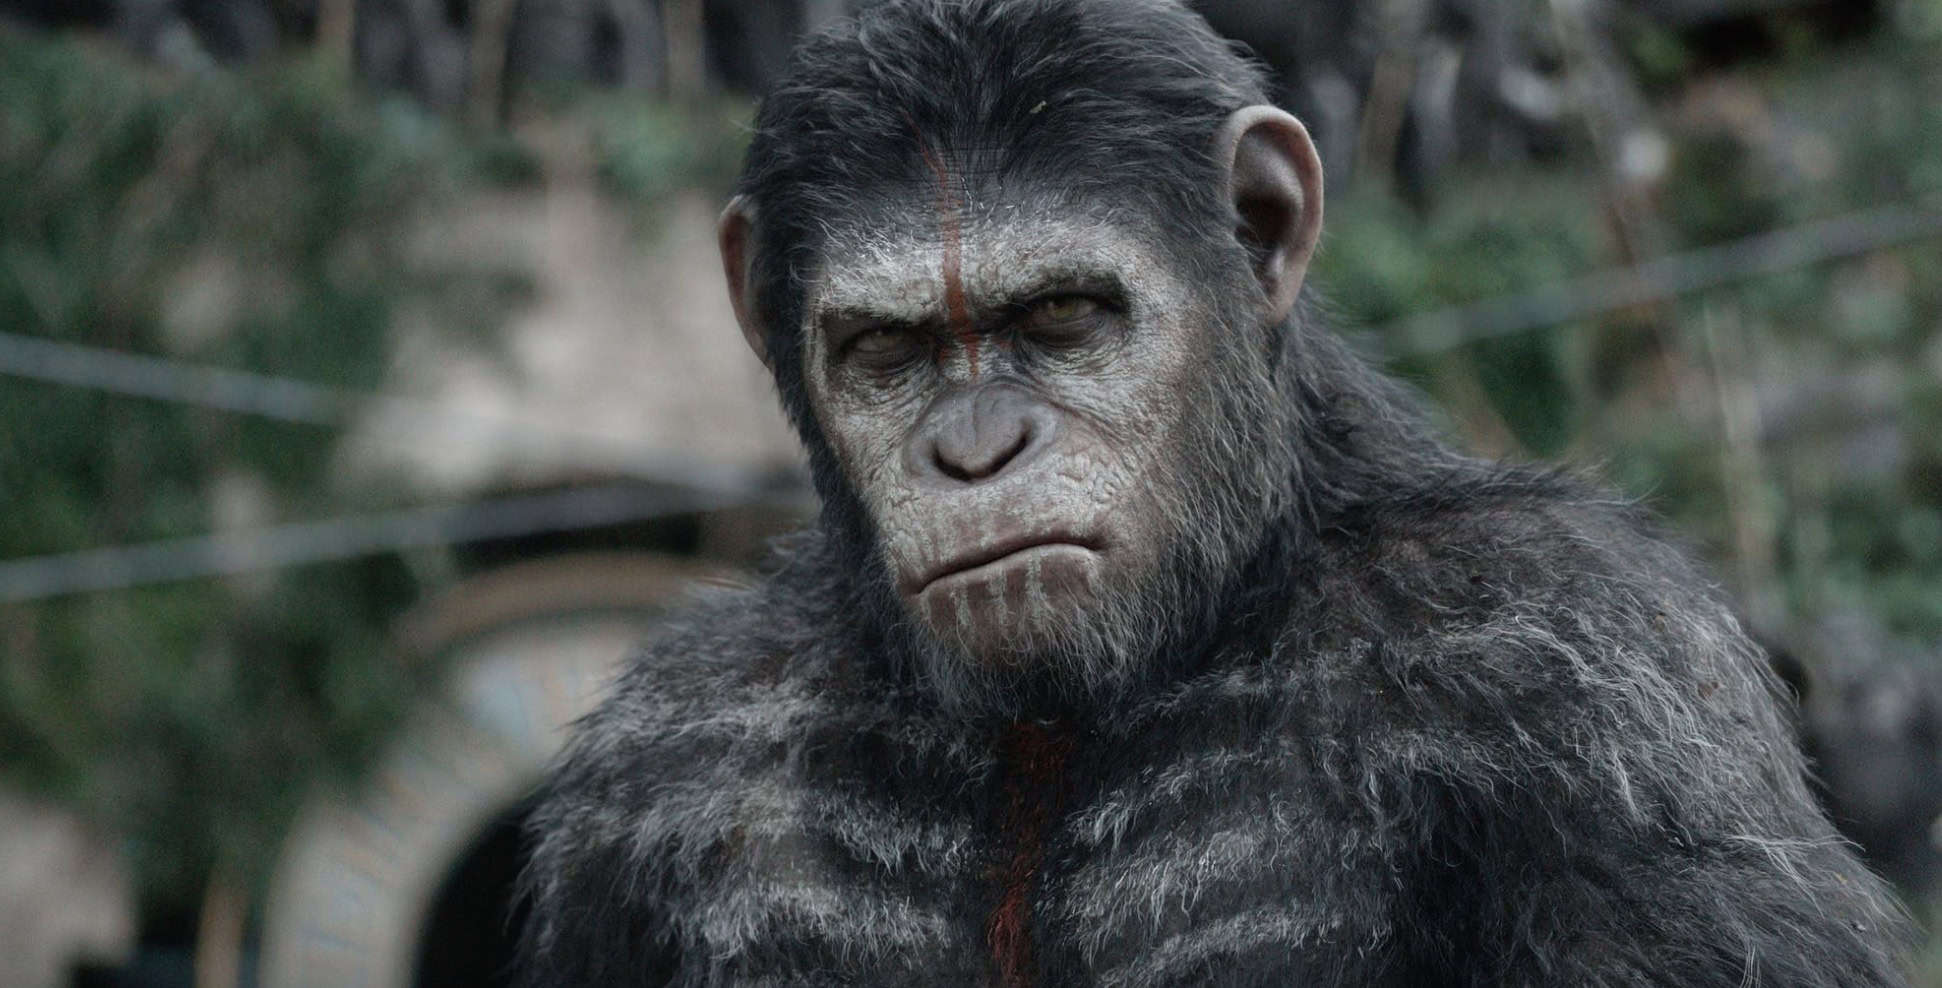 All Planet of the Apes Movies, Ranked